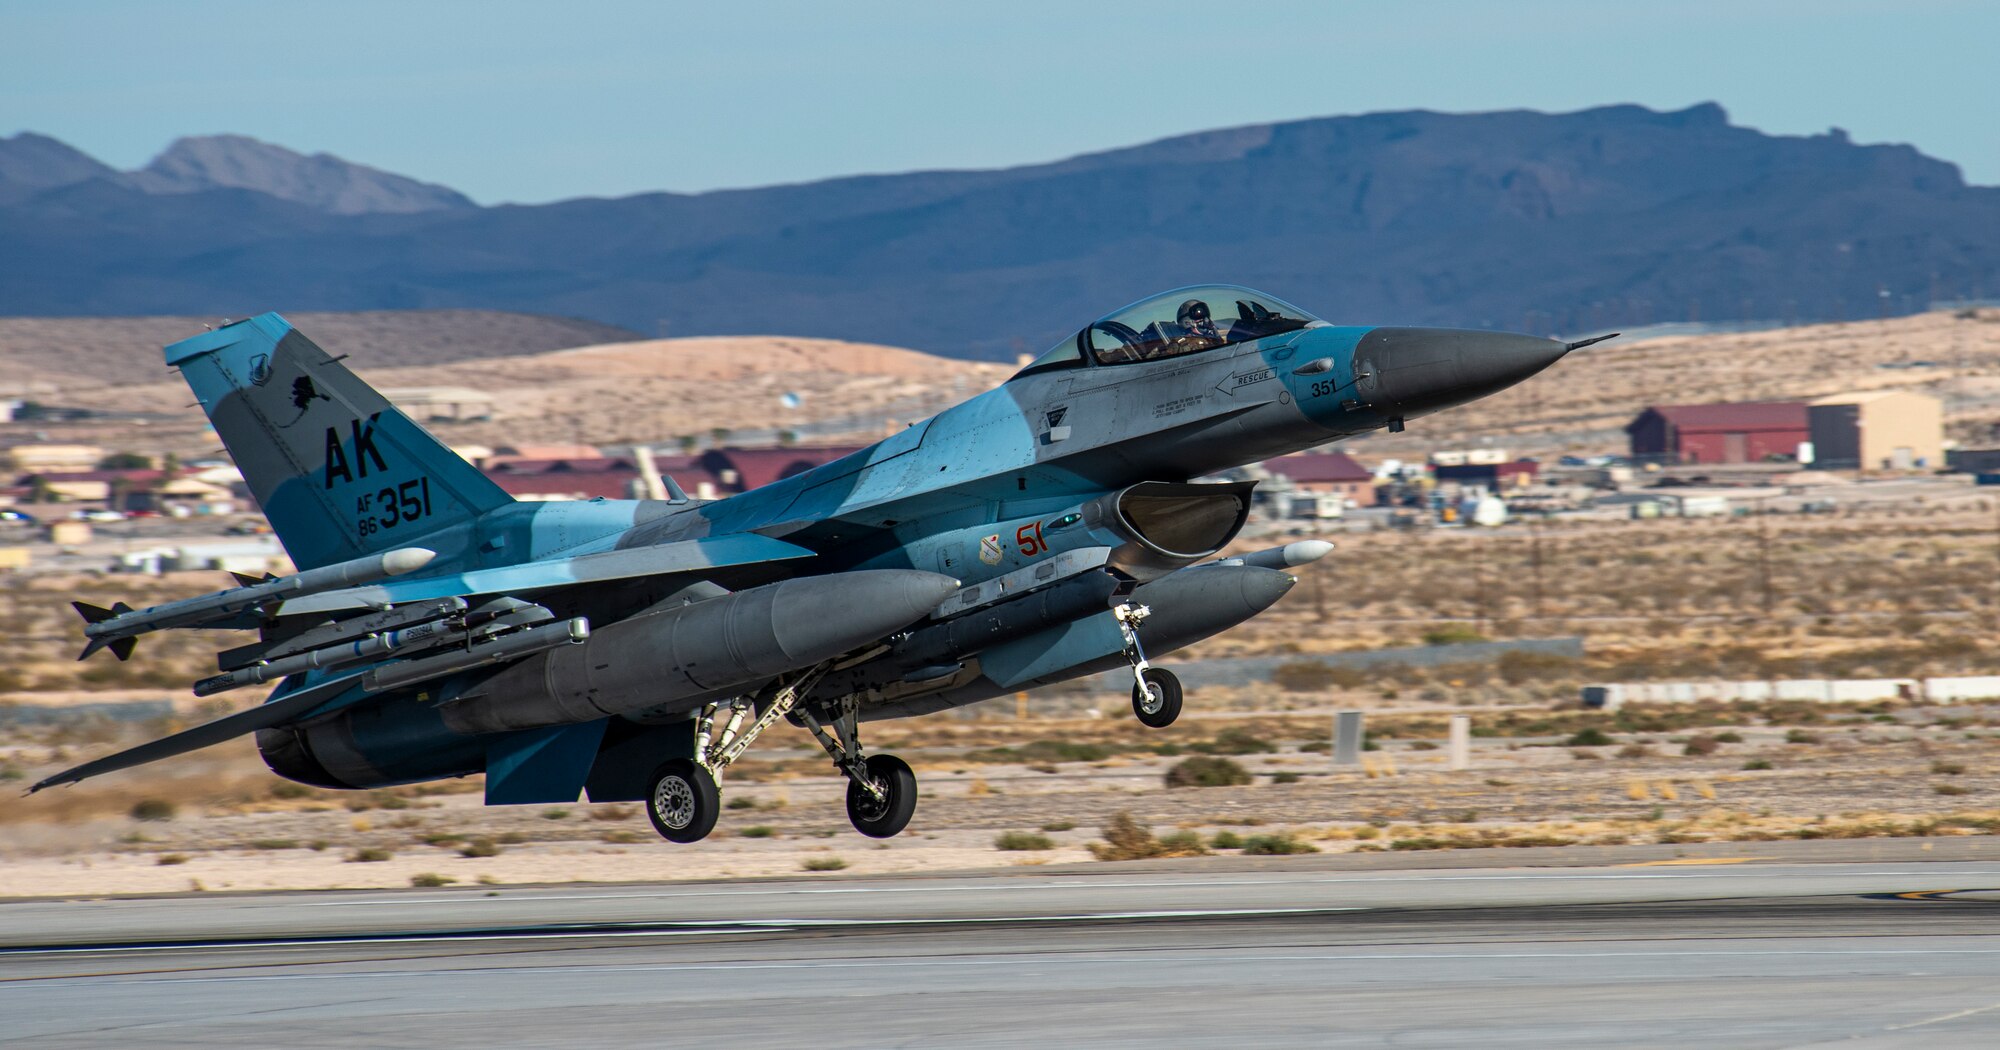 A U.S. Air Force F-16 Fighting Falcon from the 18th Aggressor Squadron takes off at Nellis Air Force Base, Nevada, Nov. 6, 2019. The 18th AGRS utilizes a mobile training team that gives them opportunities to travel to another base and prepare Combat Air Force, joint and allied aircrews on how to fight and overcome a realistic adversary. (U.S. Air Force photo by Nellis Air Force Base Public Affairs)